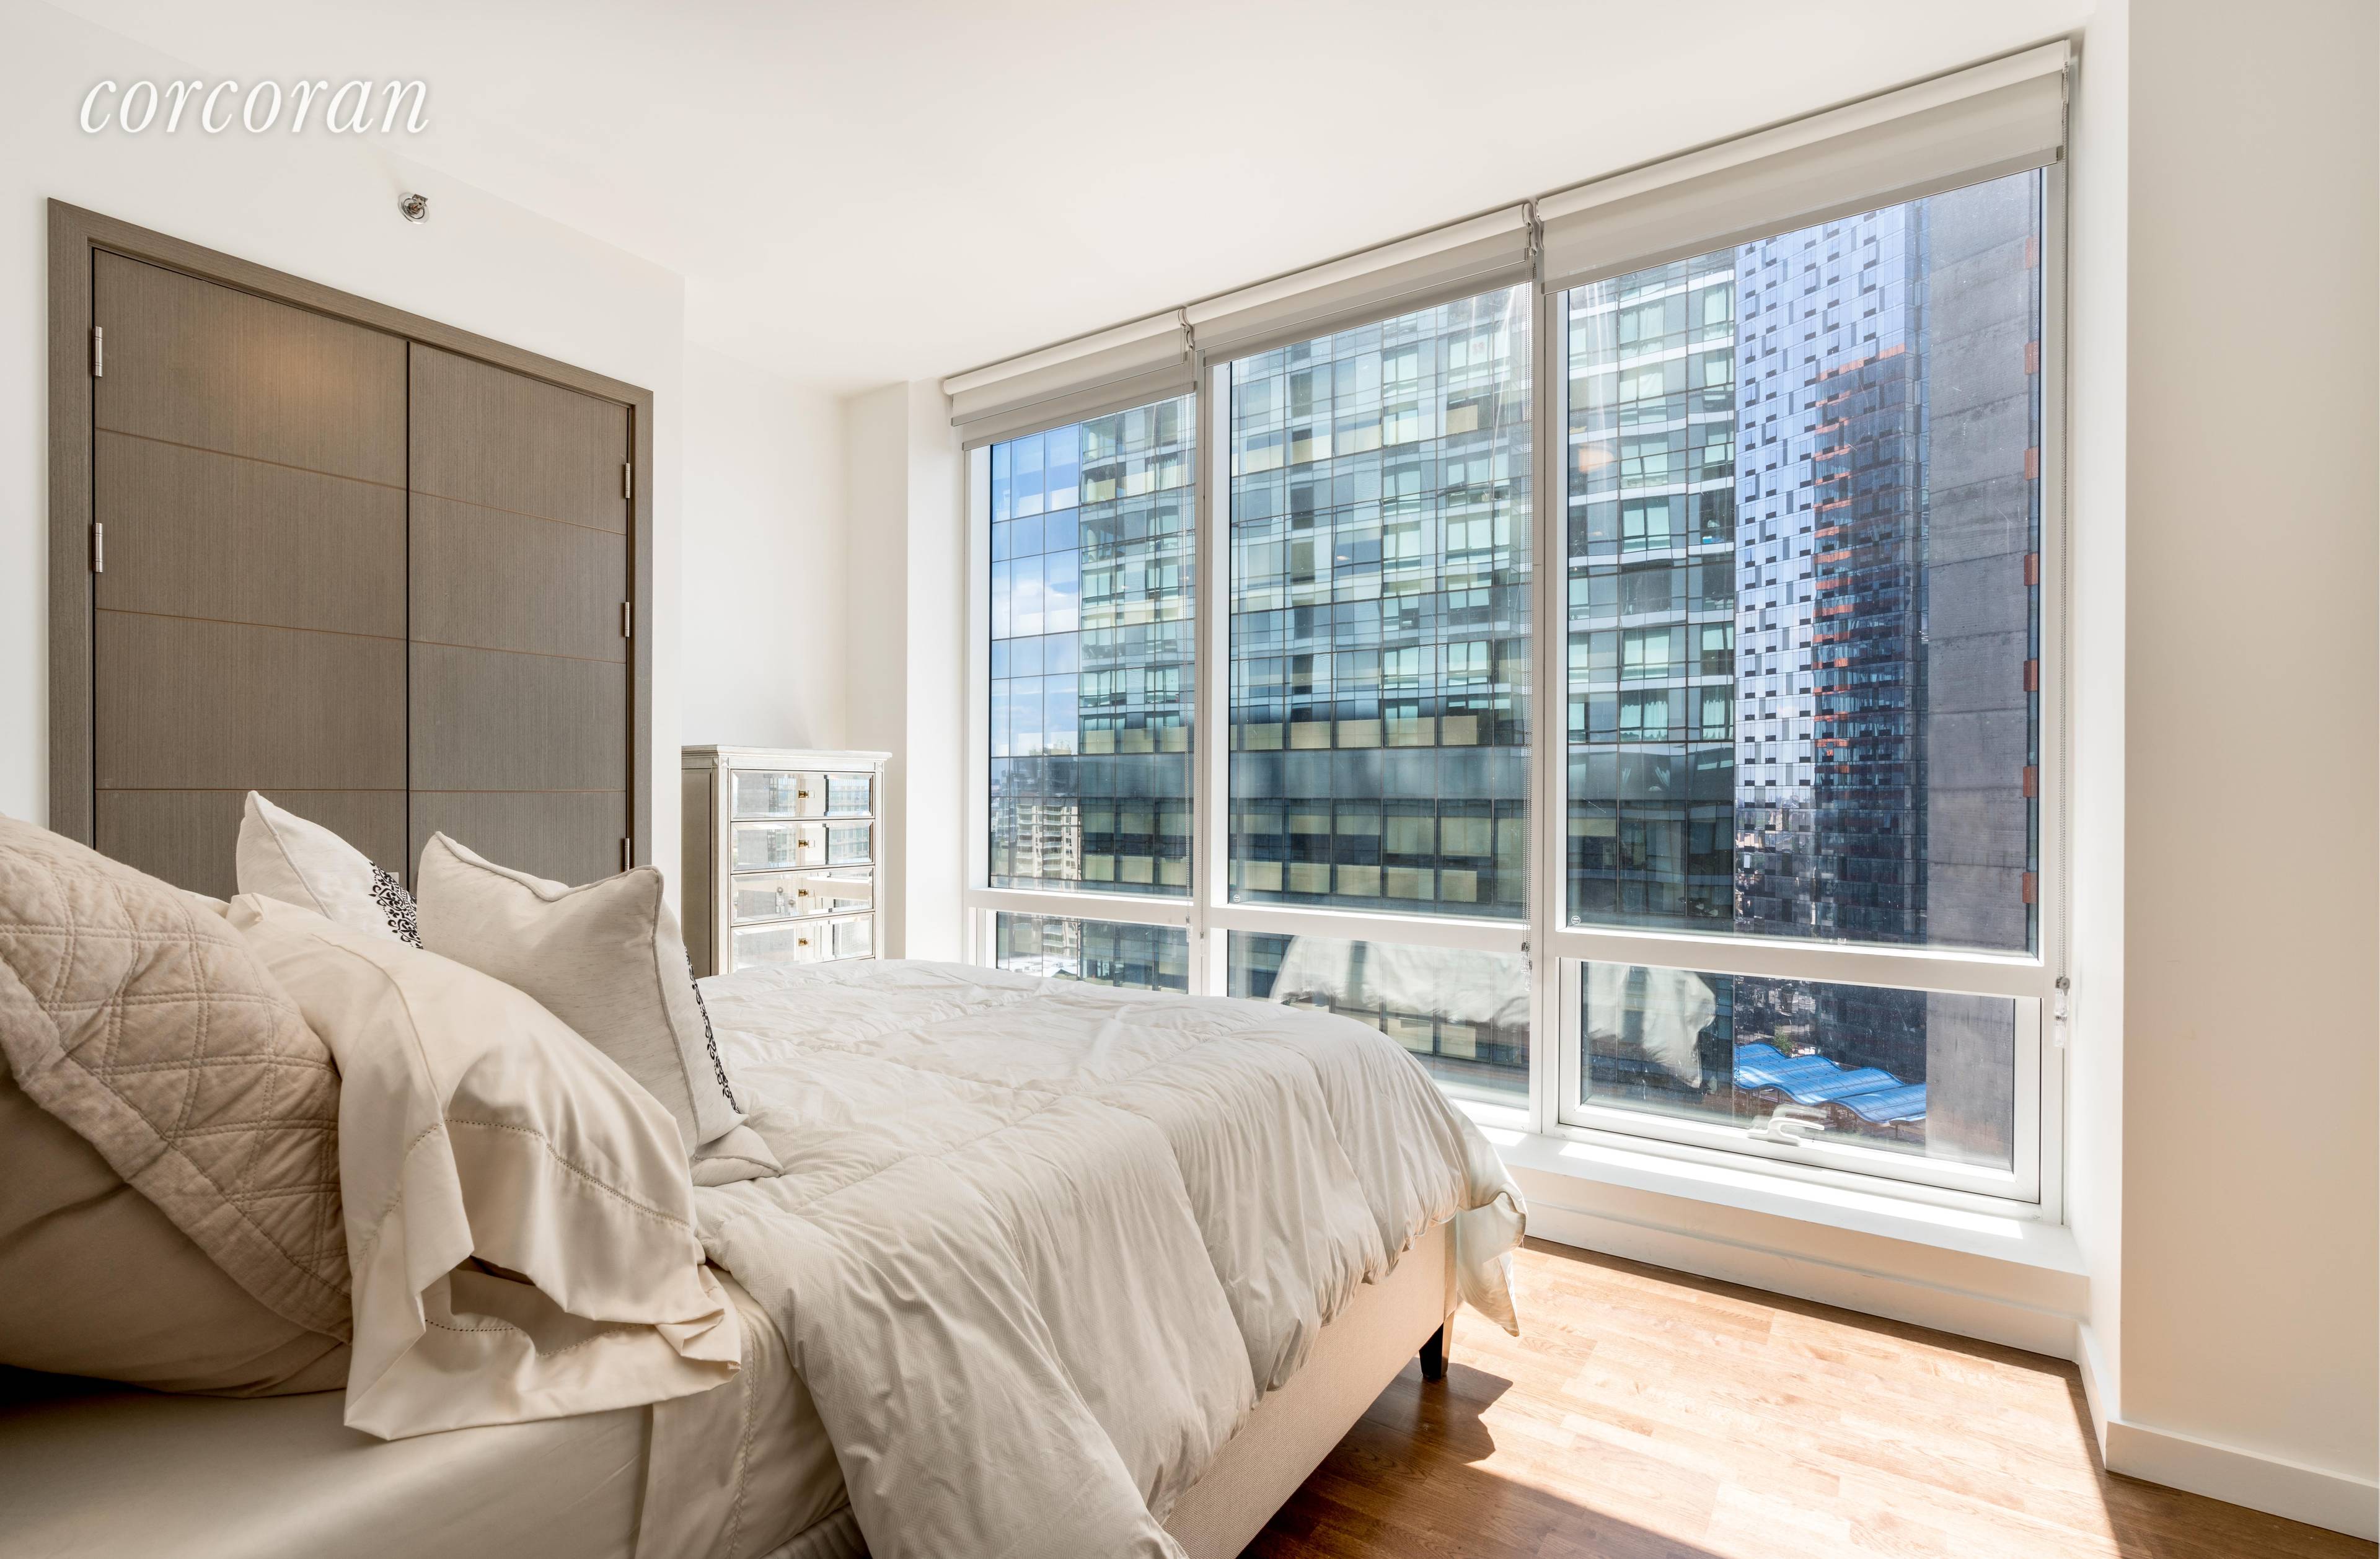 1 BED 1 BATH WITH A 15 YEAR TAX ABATEMENT Set in the heart of vibrant Long Island City, Star Tower combines sleek modern design, thoughtful space, and graceful finishes.